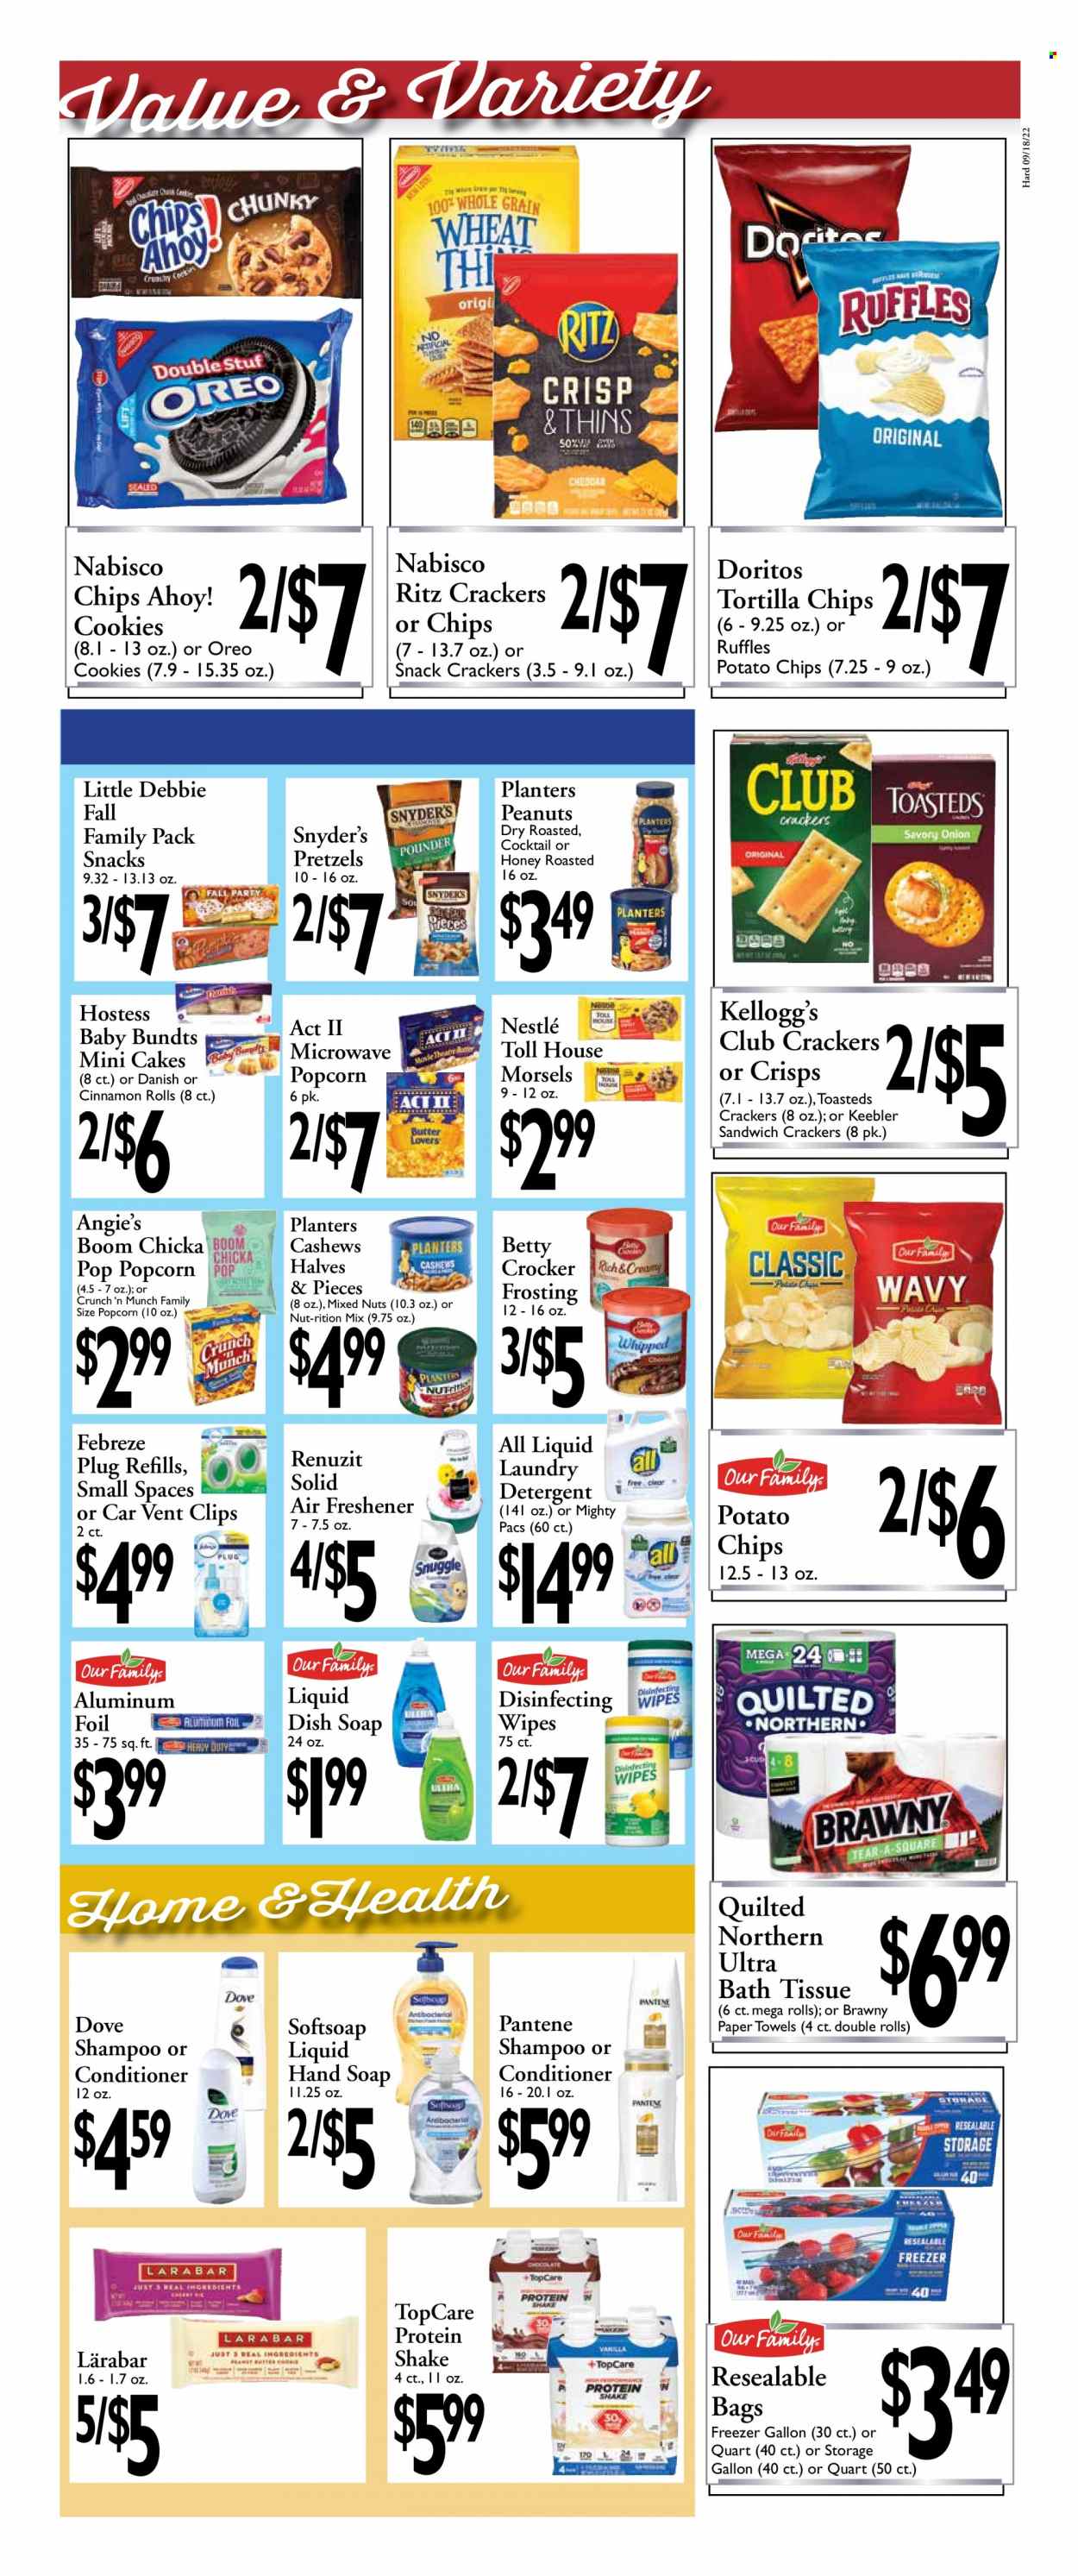 thumbnail - Harding's Markets Flyer - 09/18/2022 - 10/01/2022 - Sales products - pretzels, cake, cinnamon roll, Oreo, protein drink, shake, cookies, Dove, Nestlé, crackers, Kellogg's, Chips Ahoy!, Keebler, RITZ, Doritos, tortilla chips, potato chips, chips, popcorn, Ruffles, frosting, cashews, peanuts, mixed nuts, Planters, shampoo, Softsoap, hand soap, soap, conditioner, Pantene. Page 5.